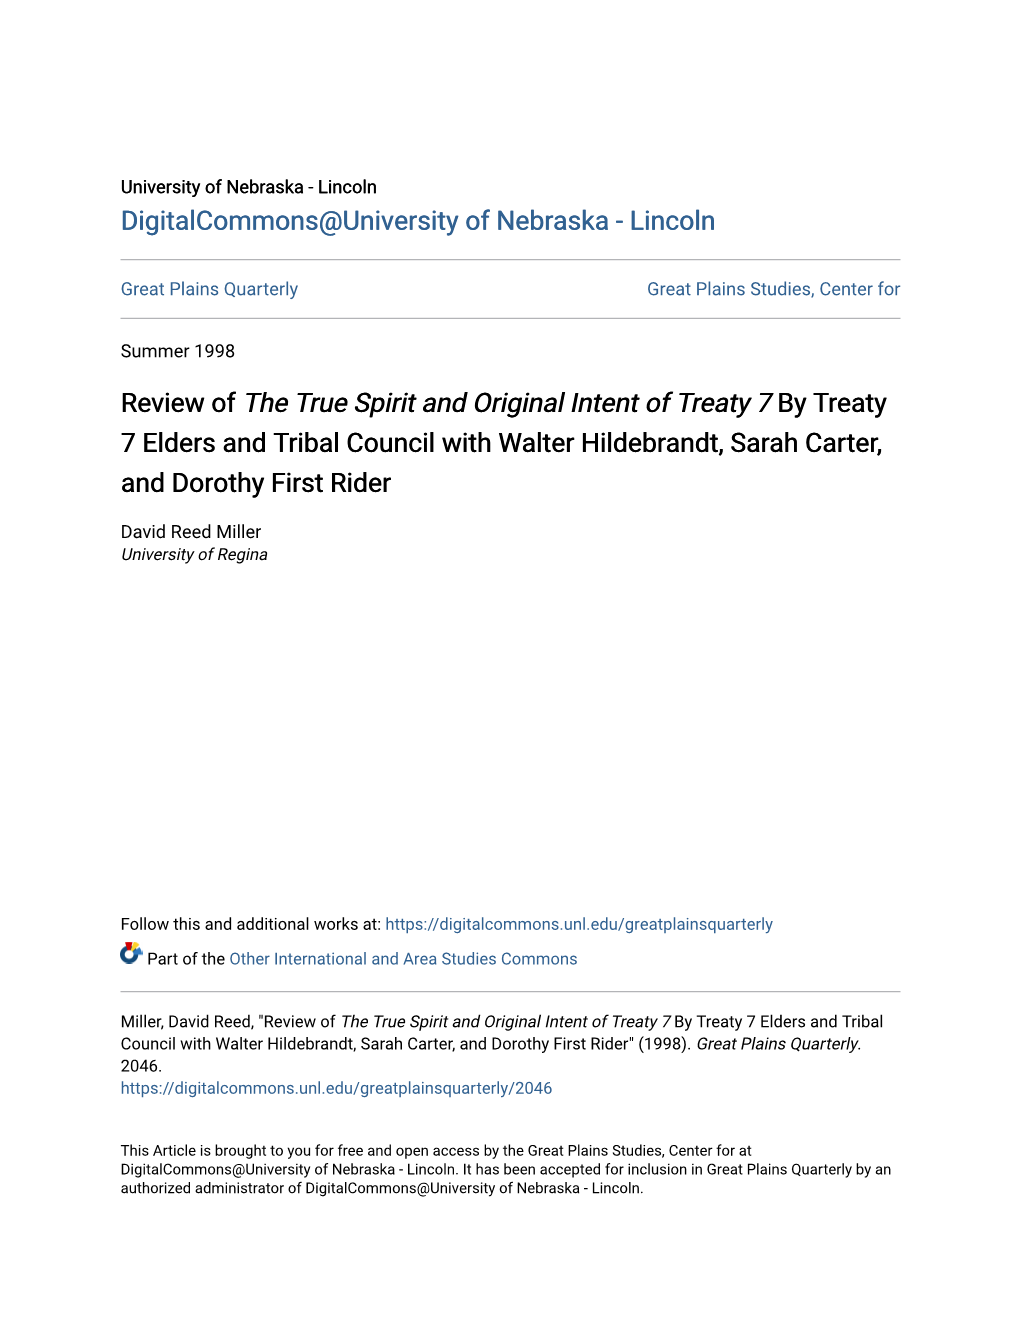 Review of the True Spirit and Original Intent of Treaty 7 by Treaty 7 Elders and Tribal Council with Walter Hildebrandt, Sarah Carter, and Dorothy First Rider